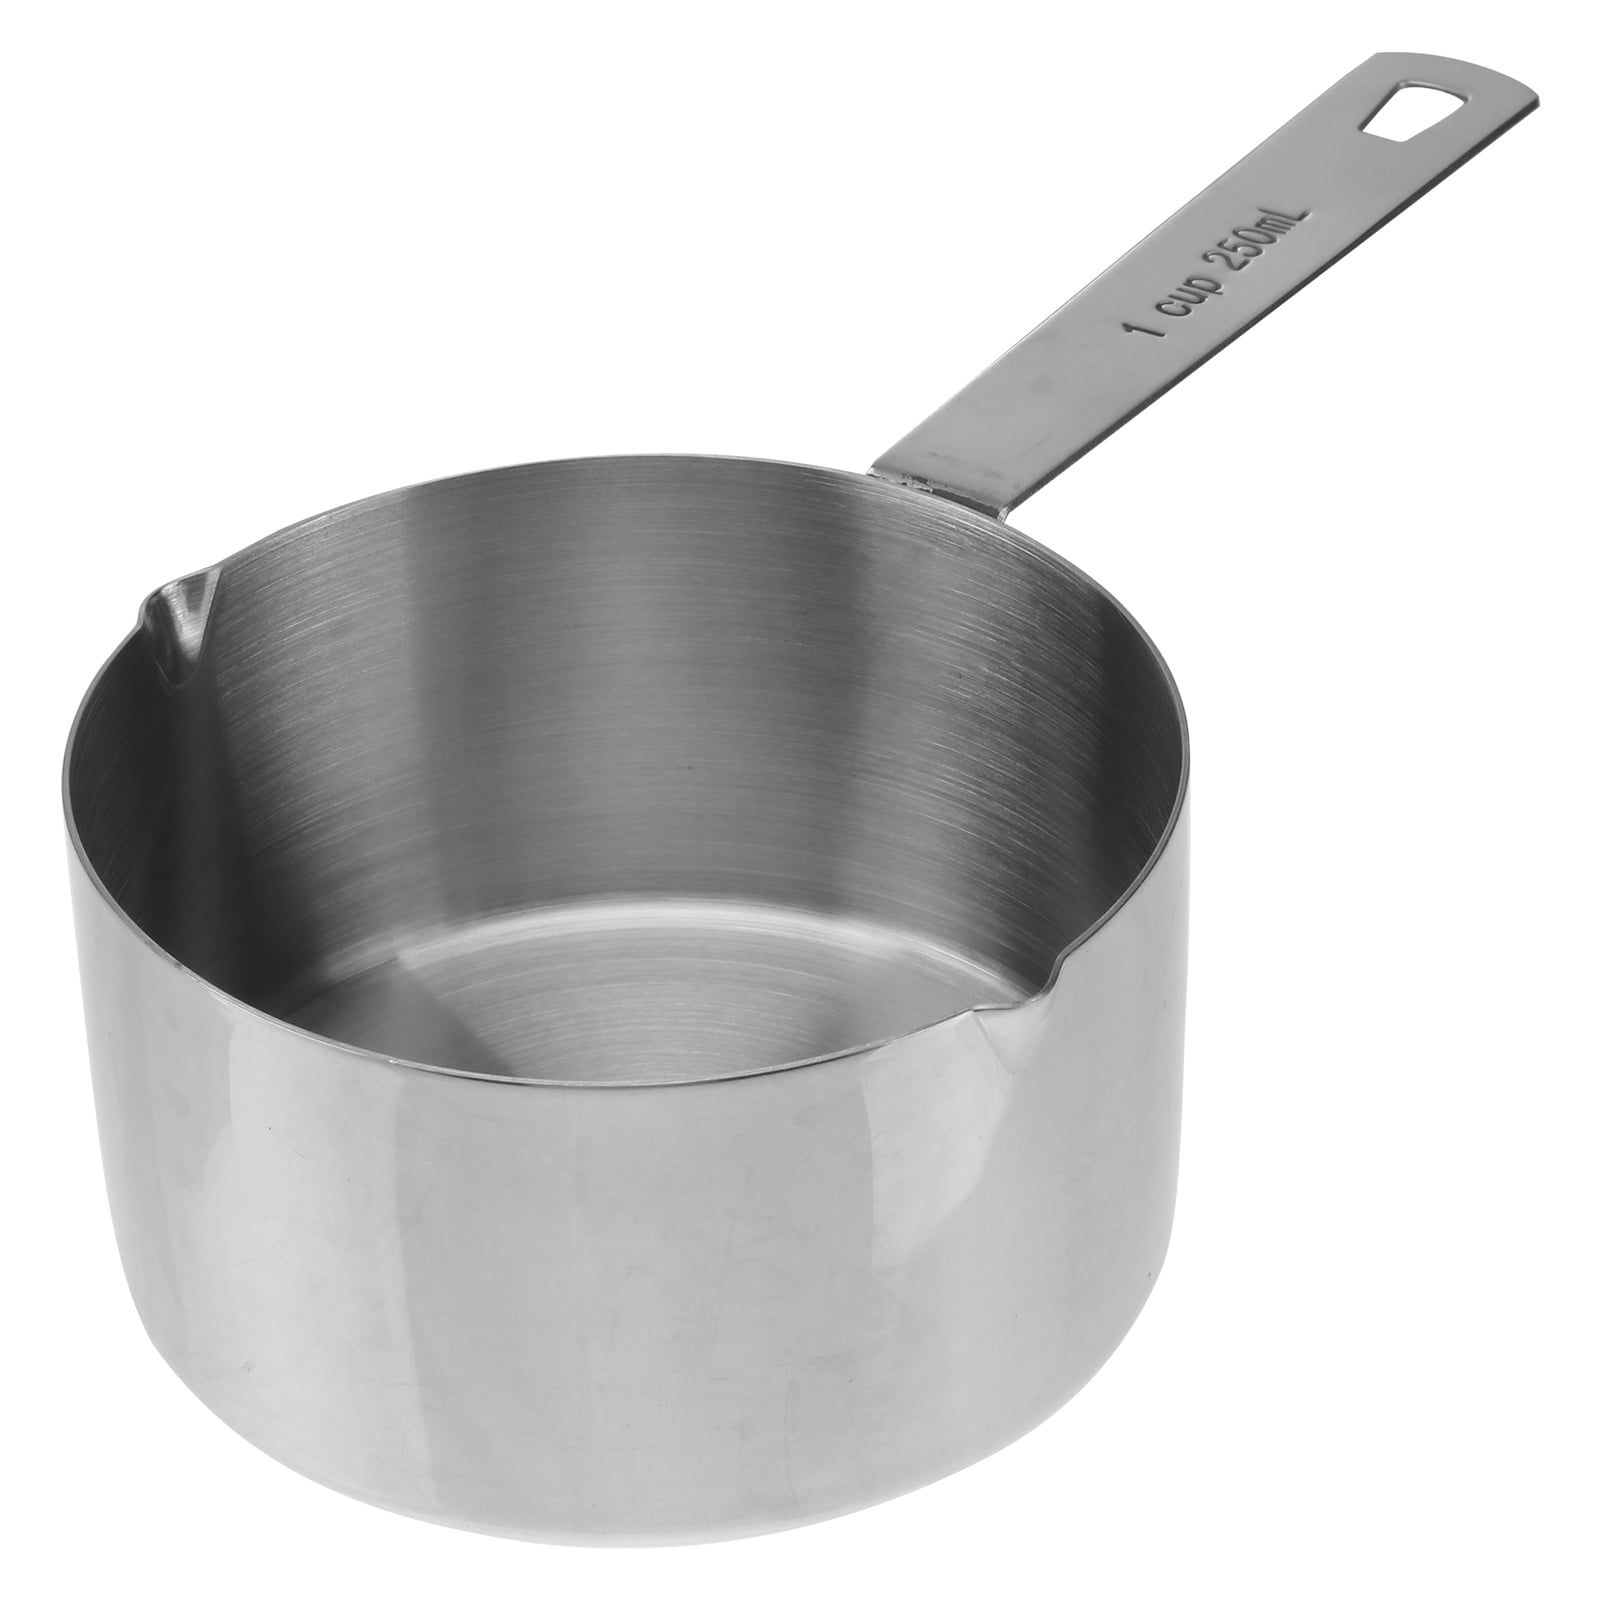 All-Clad Stainless Steel 1/2 qt. Butter Warmer - Kitchen & Company